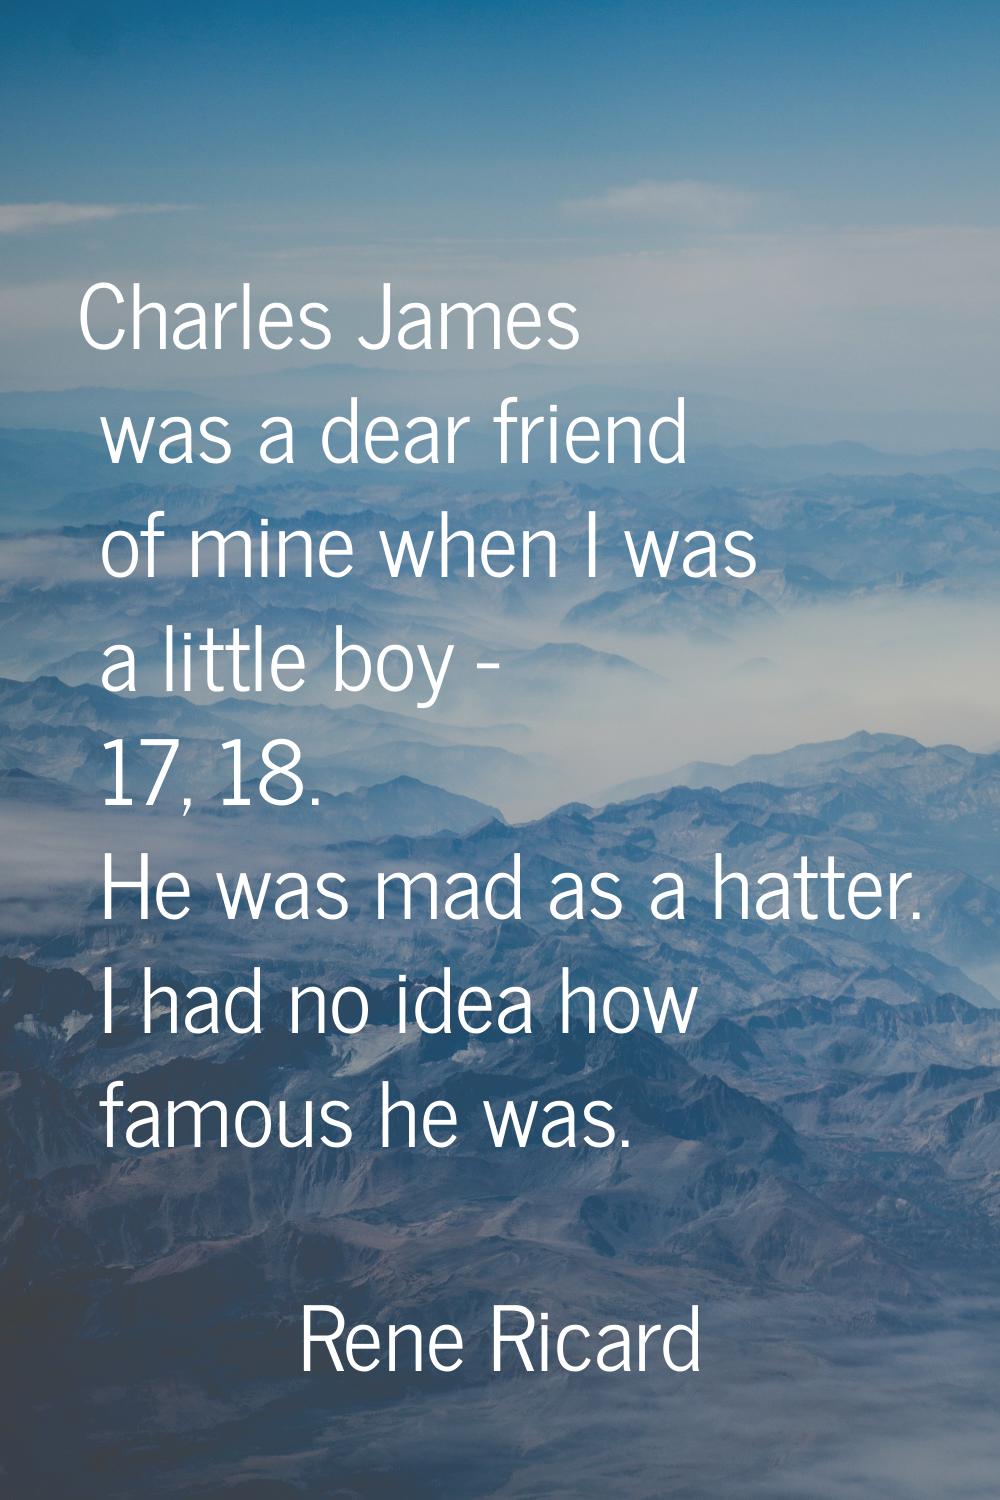 Charles James was a dear friend of mine when I was a little boy - 17, 18. He was mad as a hatter. I